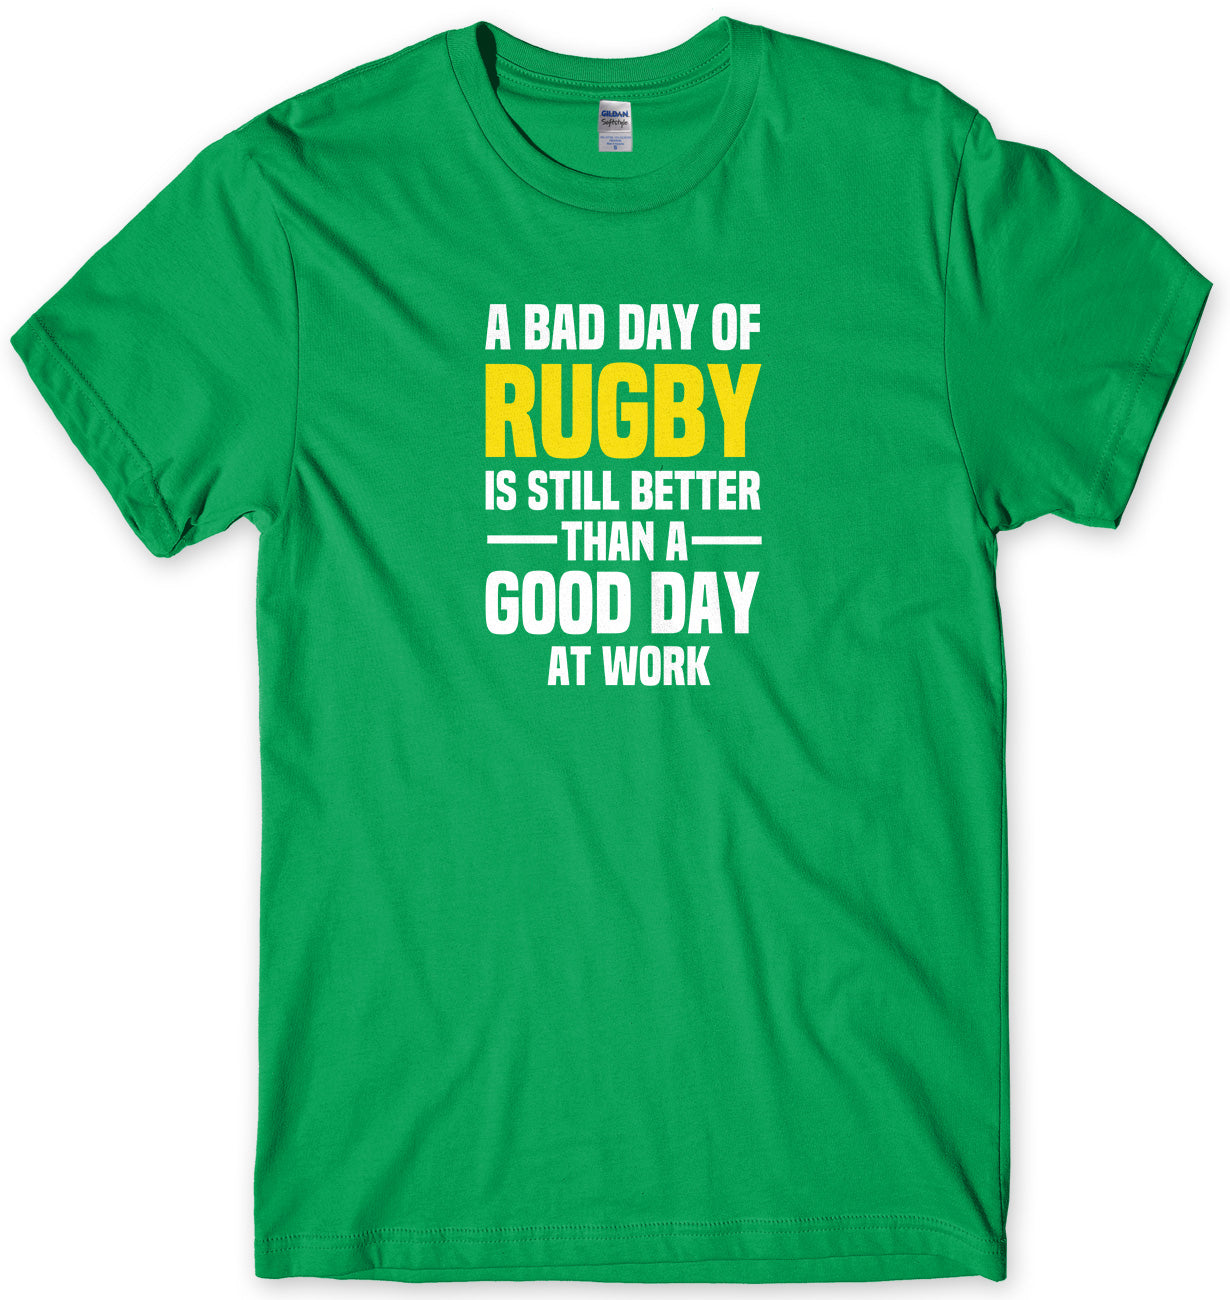 A BAD DAY OF RUGBY IS STILL BETTER THAN A GOOD DAY AT WORK MENS FUNNY SLOGAN UNISEX T-SHIRT - StreetSide Surgeons